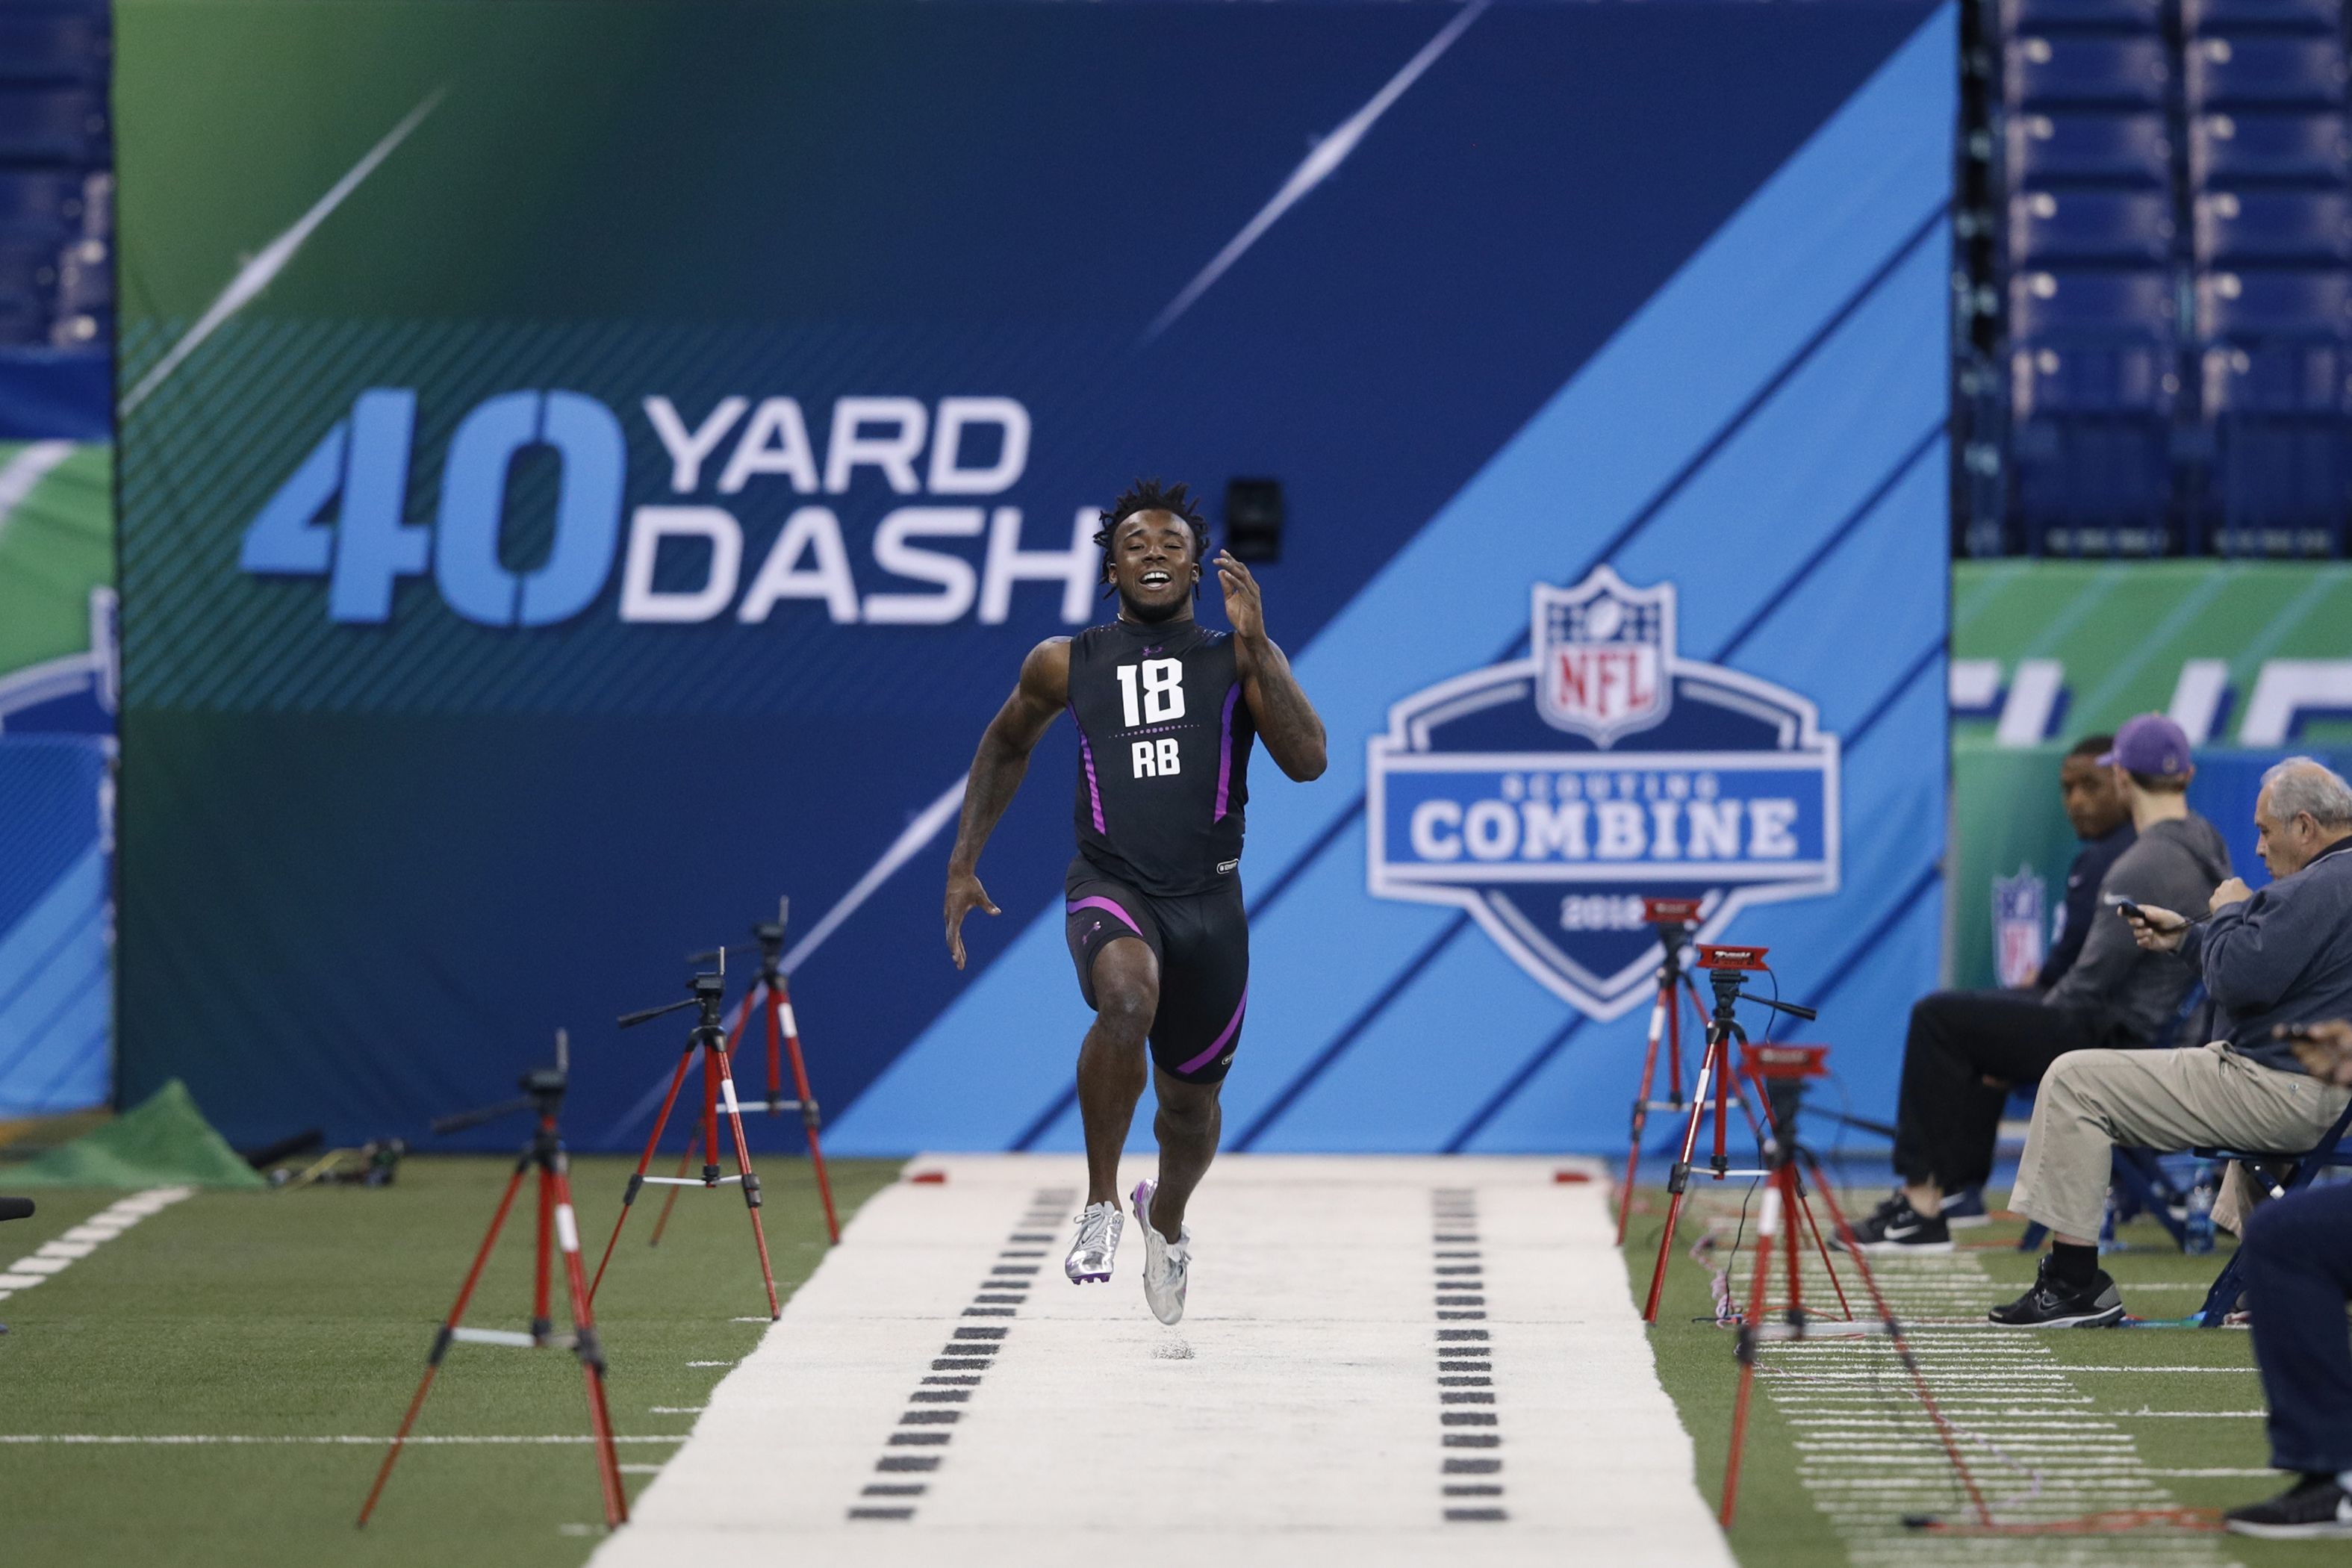 NFL Scouting Combine There is no ‘perfect’ evaluation tool